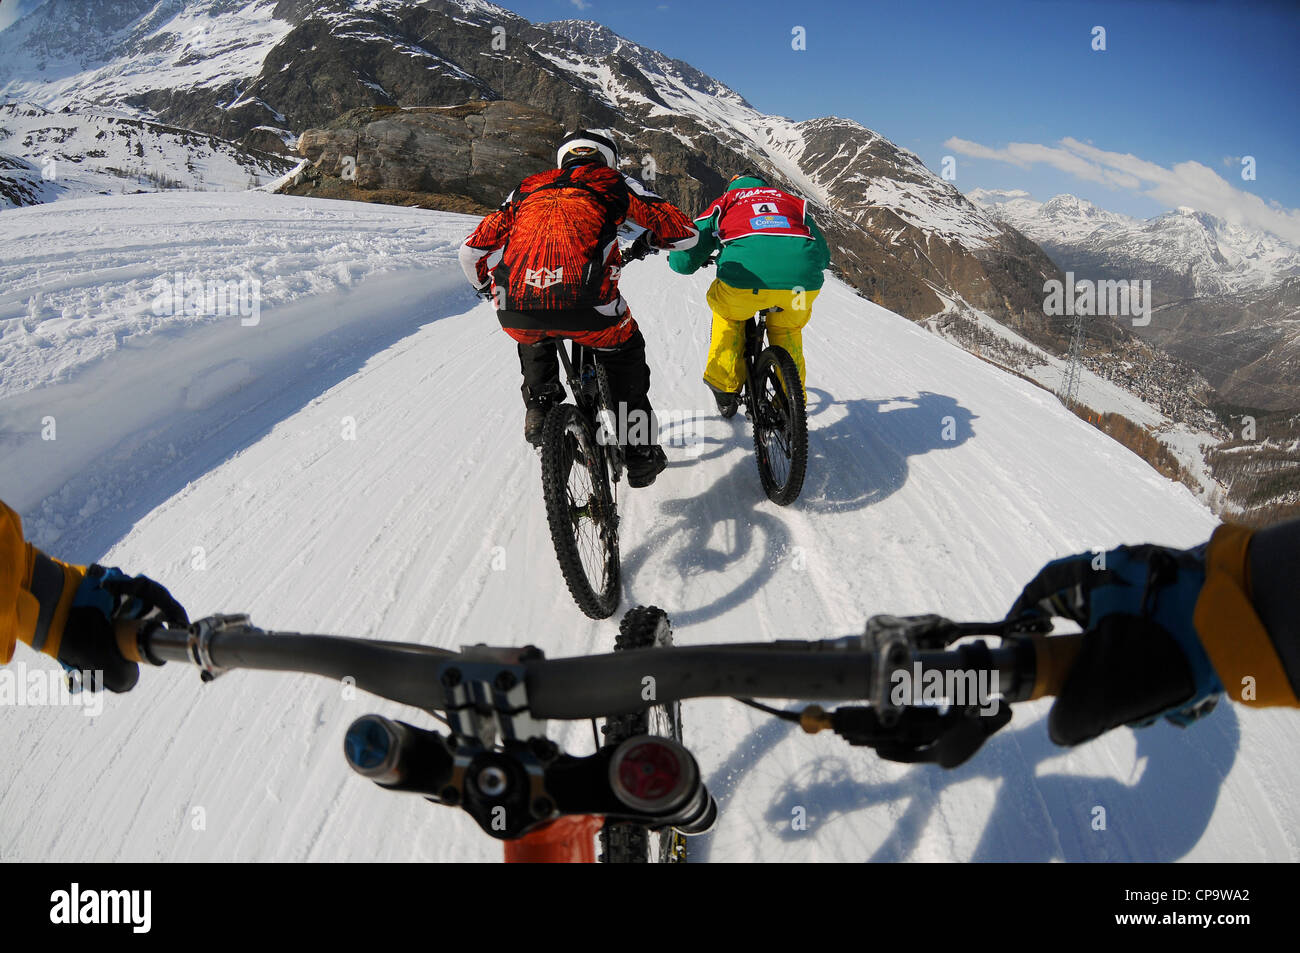 A mountain biker rides downhill hill on snow with an on-board camera following two other riders. Stock Photo